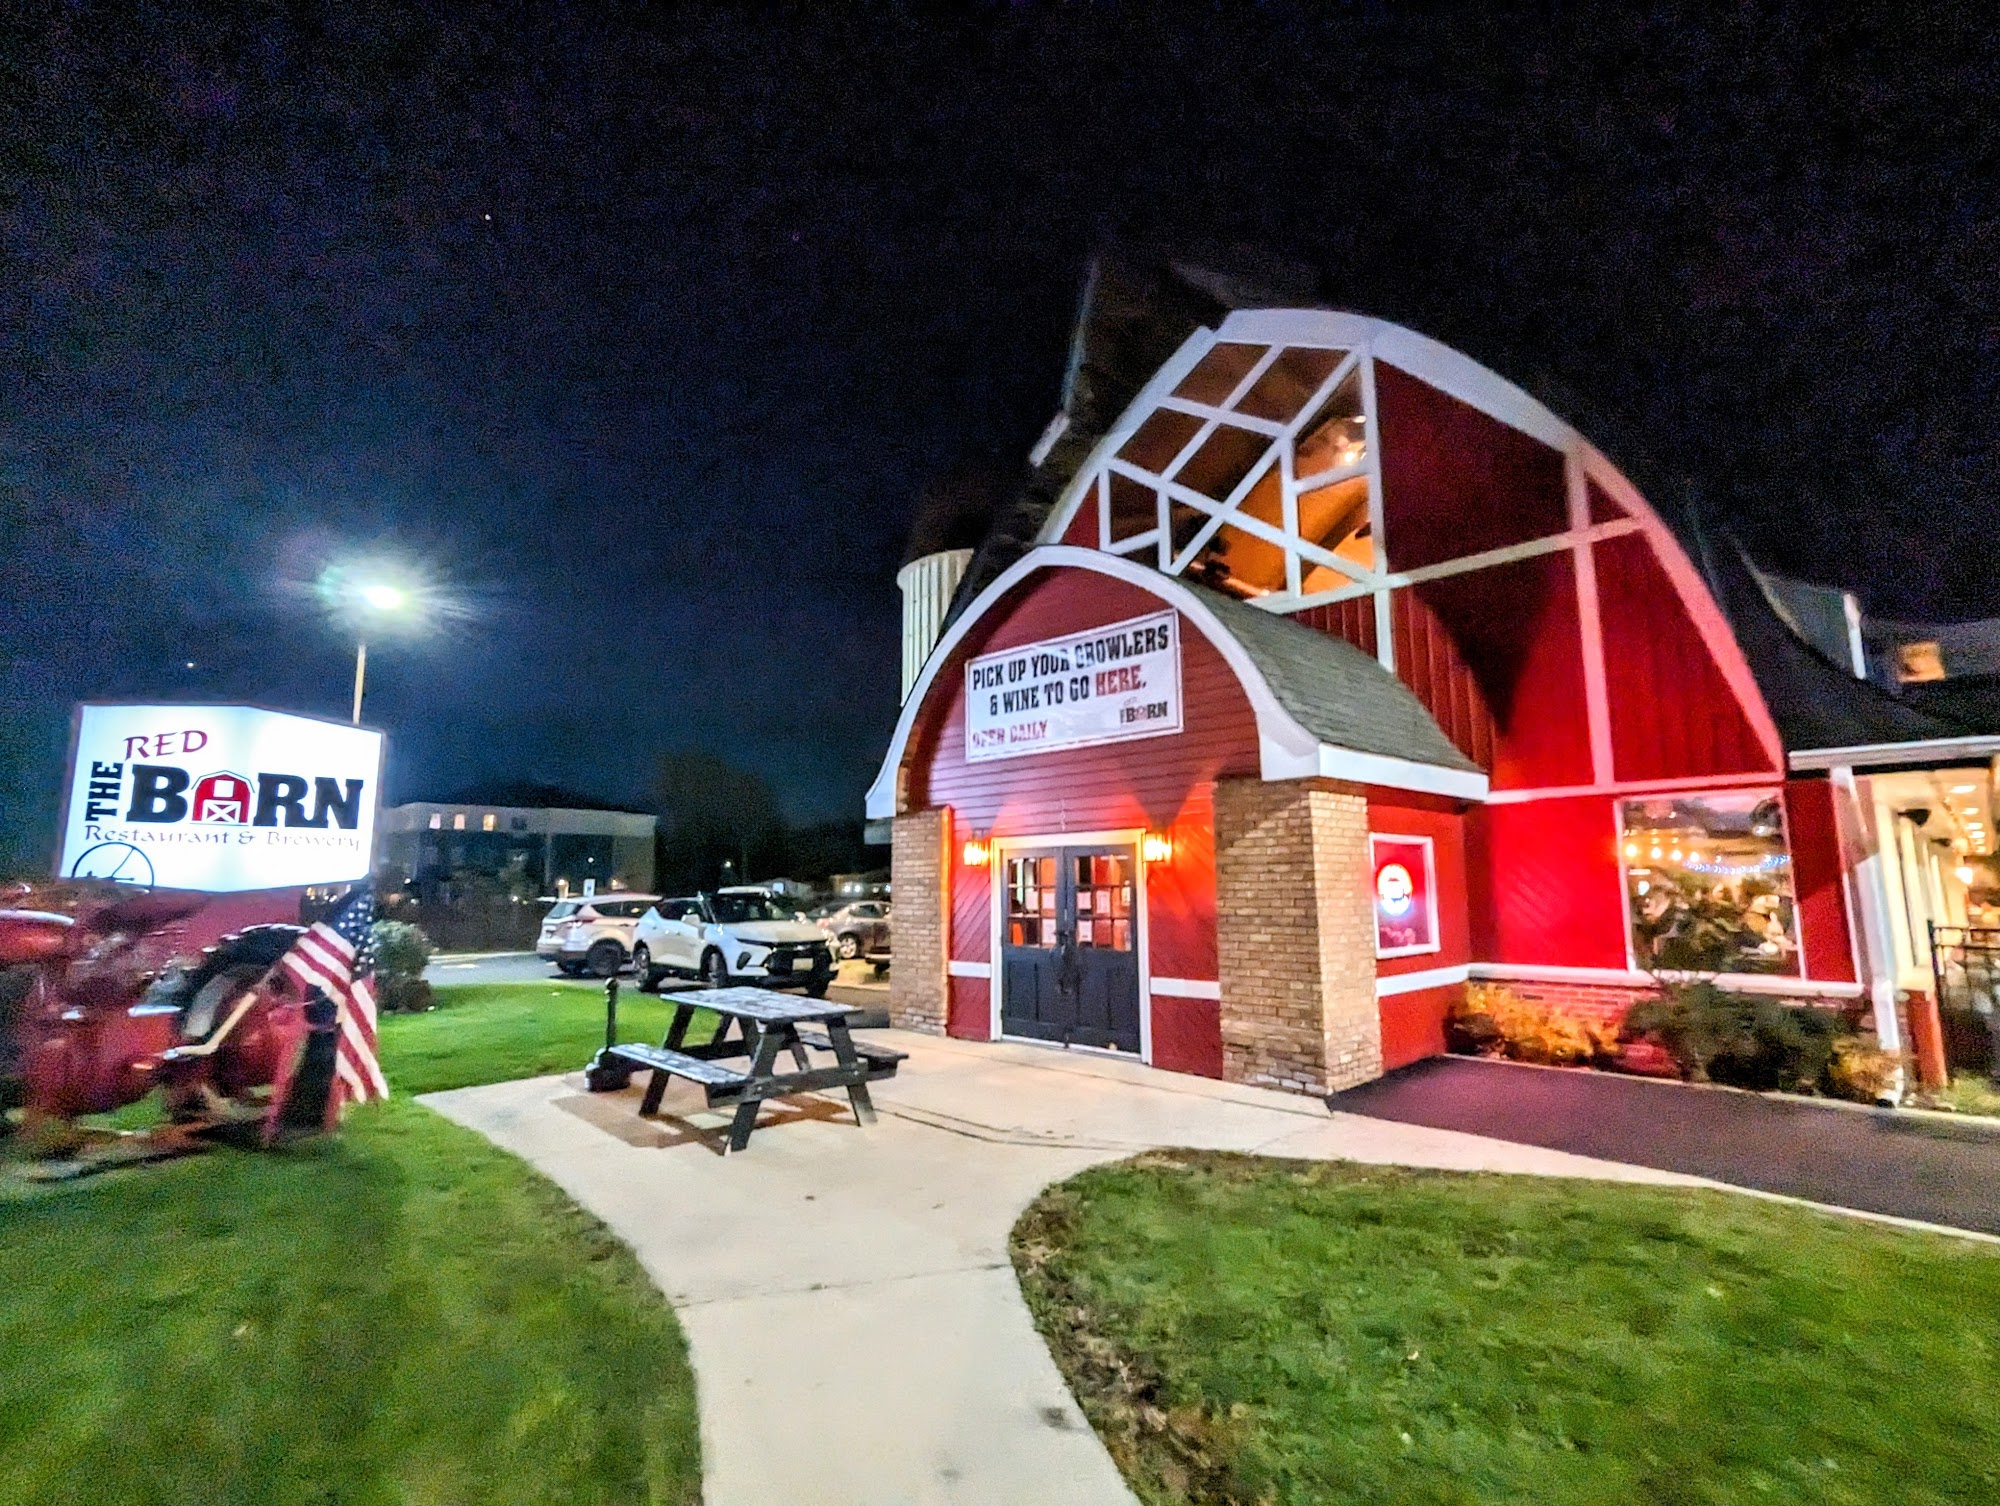 The Red Barn Restaurant and Brewery